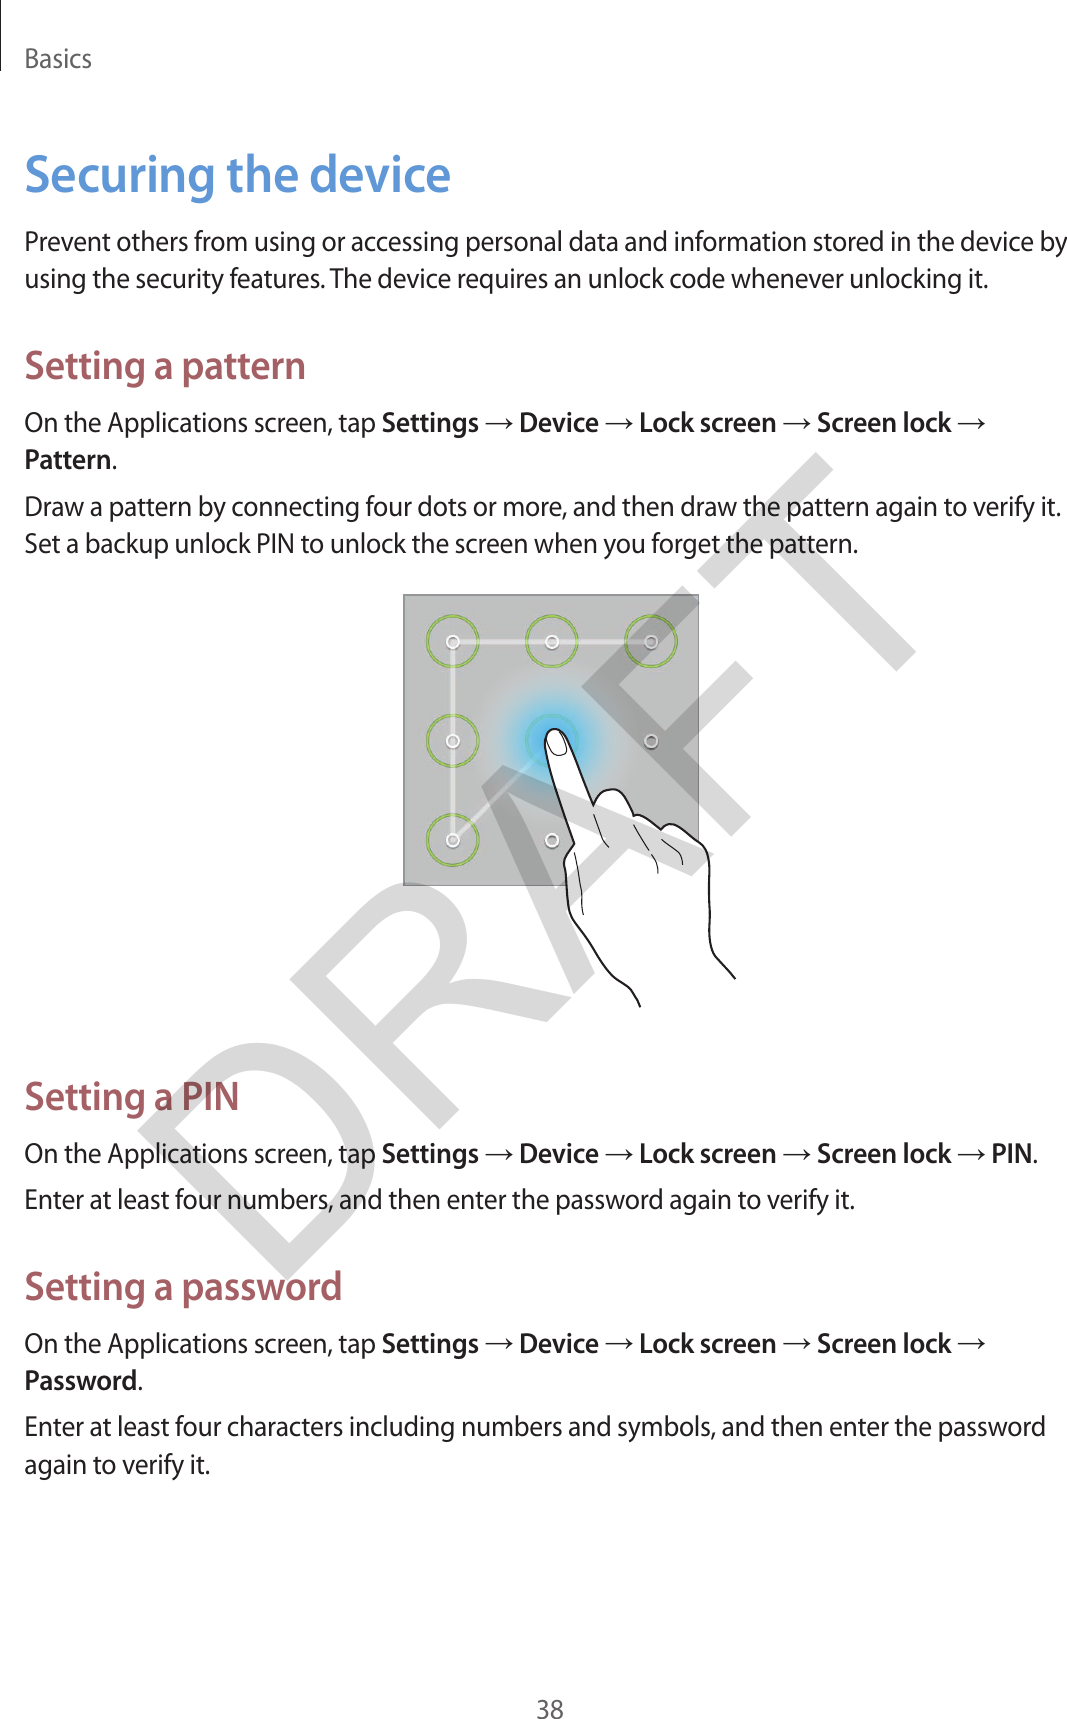 Basics38Securing the devicePrevent others from using or accessing personal data and information stored in the device by using the security features. The device requires an unlock code whenever unlocking it.Setting a patternOn the Applications screen, tap Settings → Device → Lock screen → Screen lock → Pattern.Draw a pattern by connecting four dots or more, and then draw the pattern again to verify it. Set a backup unlock PIN to unlock the screen when you forget the pattern.Setting a PINOn the Applications screen, tap Settings → Device → Lock screen → Screen lock → PIN.Enter at least four numbers, and then enter the password again to verify it.Setting a passwordOn the Applications screen, tap Settings → Device → Lock screen → Screen lock → Password.Enter at least four characters including numbers and symbols, and then enter the password again to verify it.DRAFT